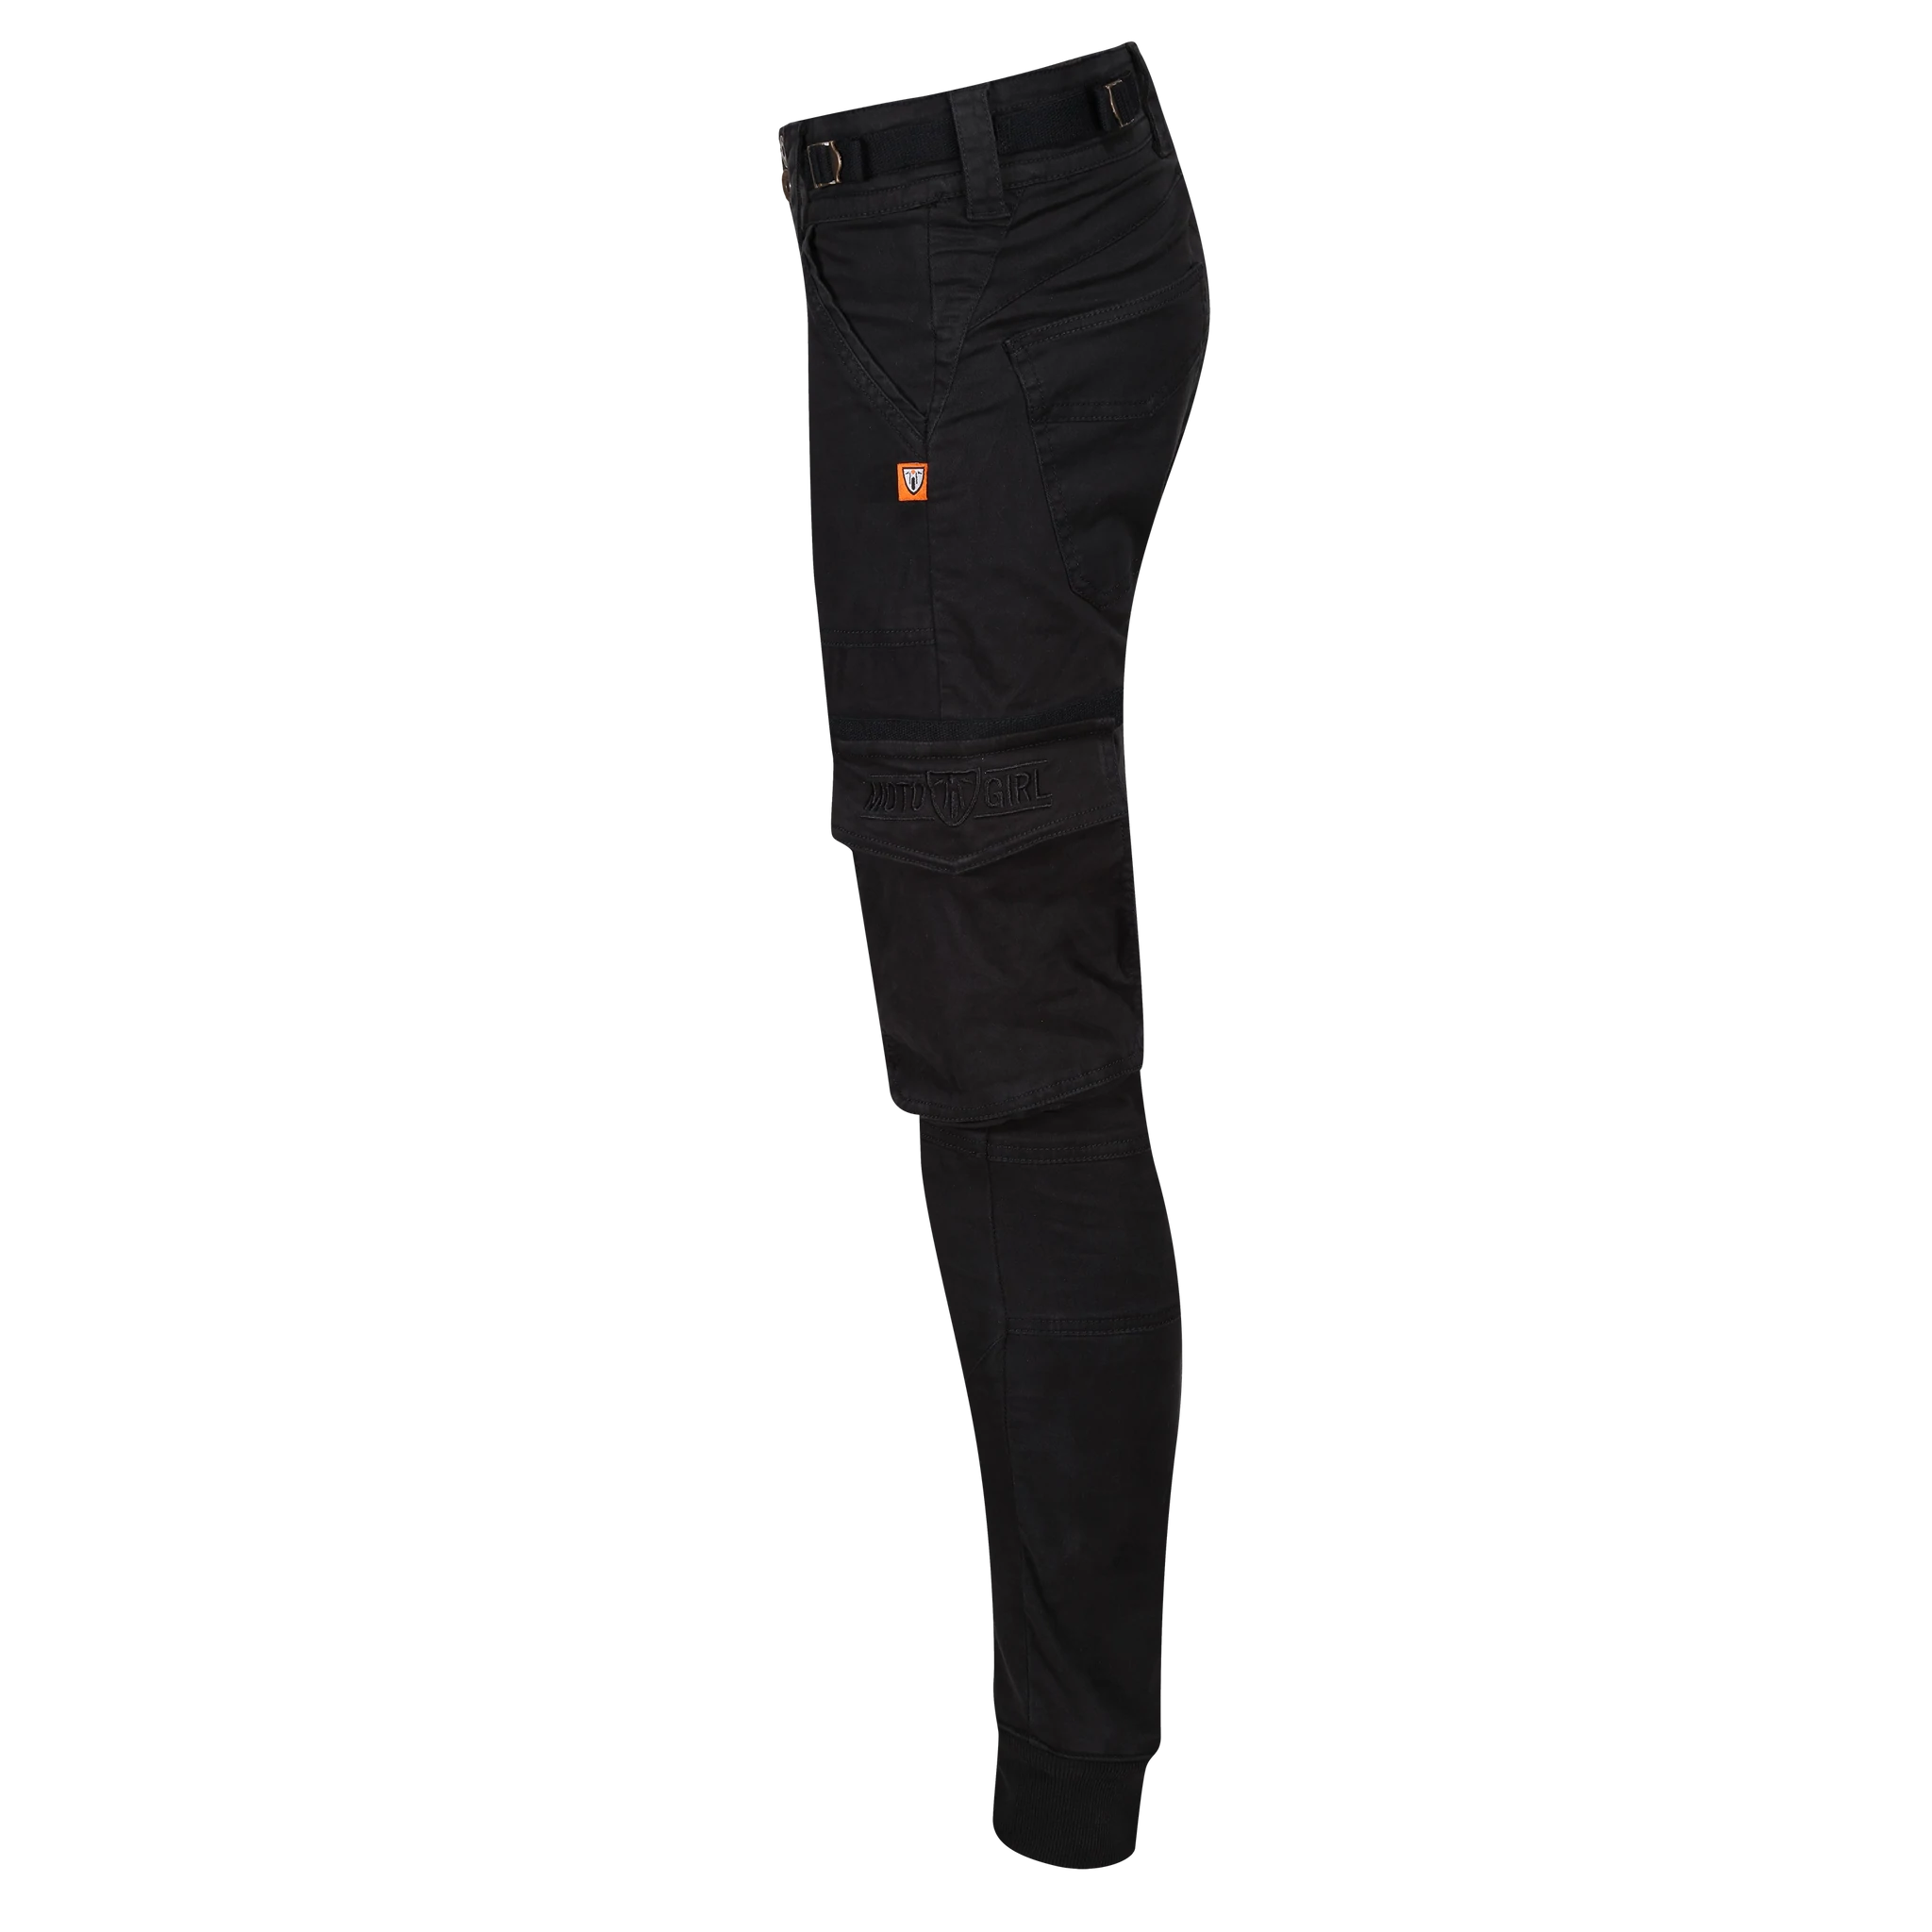 Women's black motorcycle cargo pants Lara from MotoGirl from the side